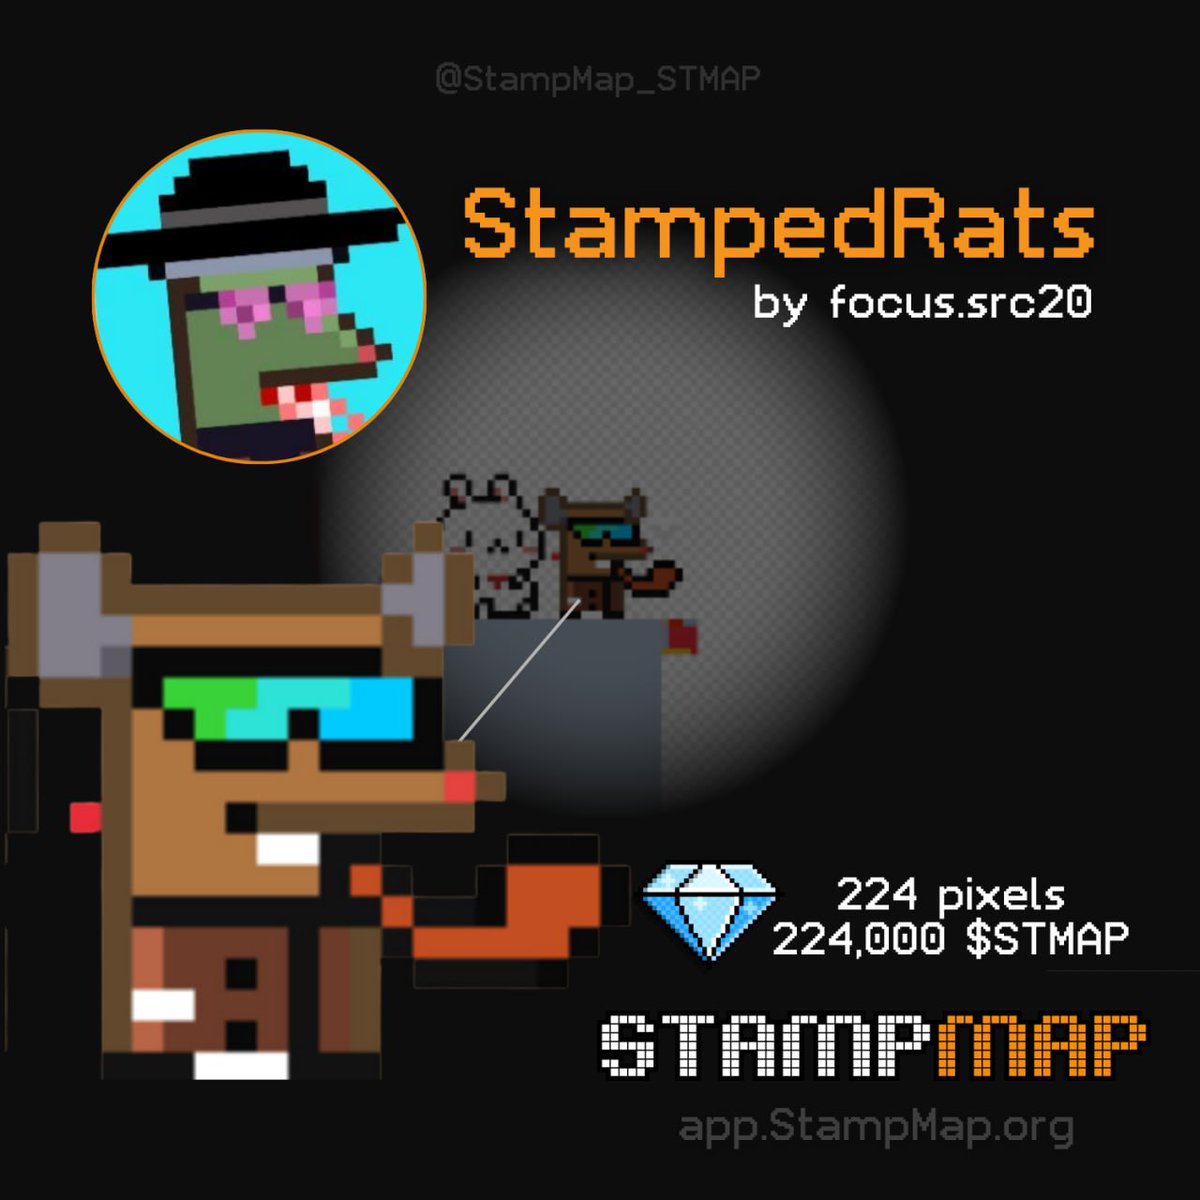 Today, a focus on the #pixelart of one of our most active StampMappers : Focus.src20 @focus268 has chosen to represent on #StampMap a rat from the famous Stamps collection: @StampedRats. An original shape, and a very stylish rat with its glasses, don’t you think? 🟧 224 pixels